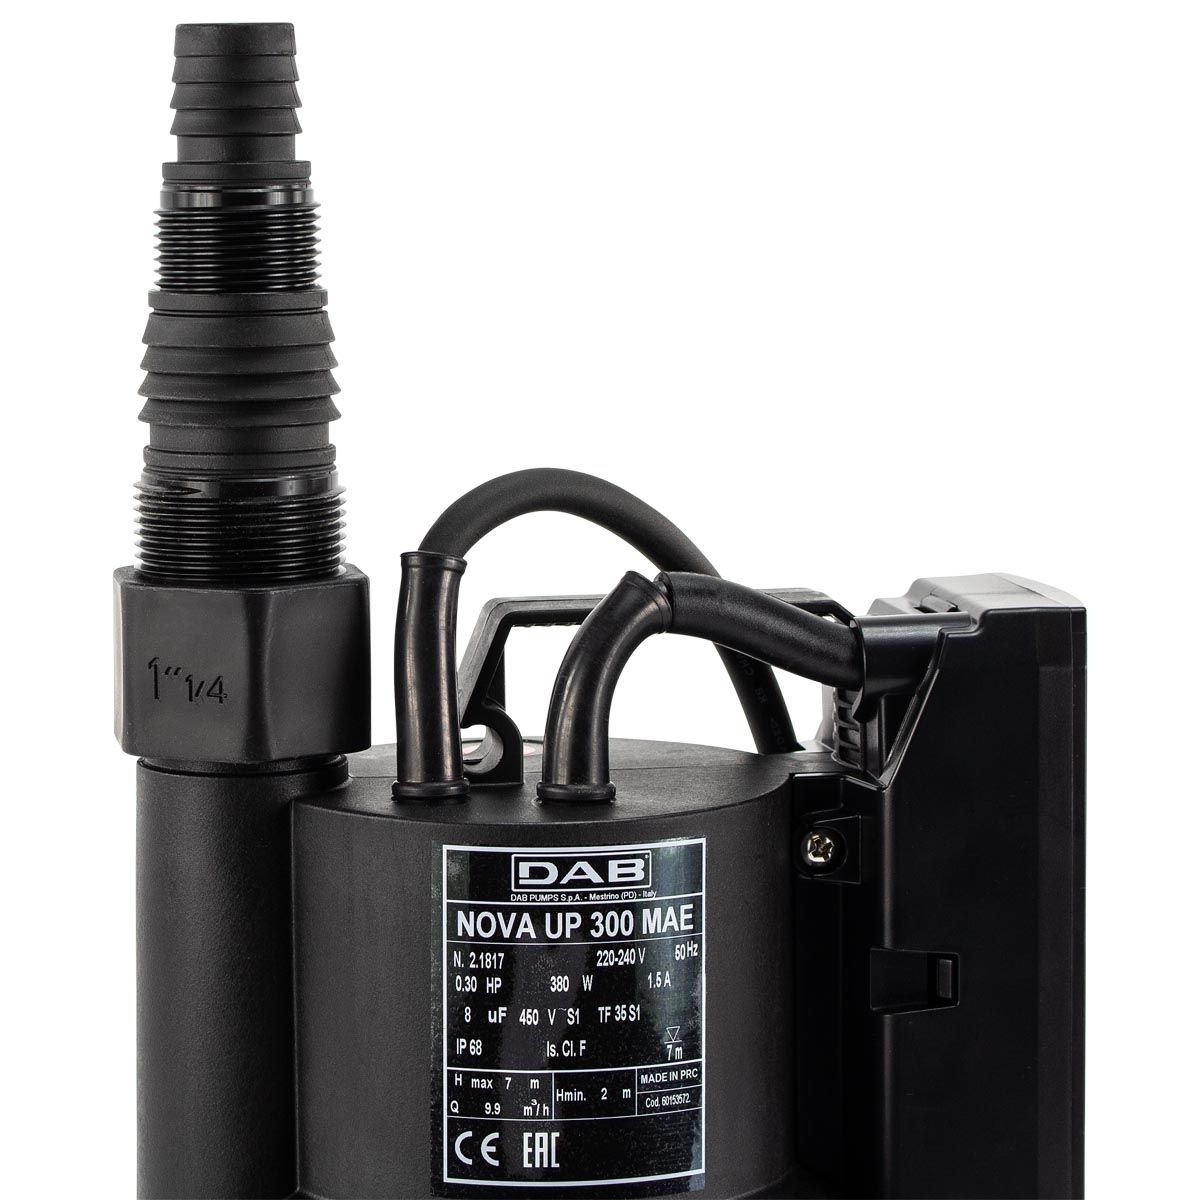 DAB Nova Up Submersible Pump/Flat Suction 300M-AE with Electronic